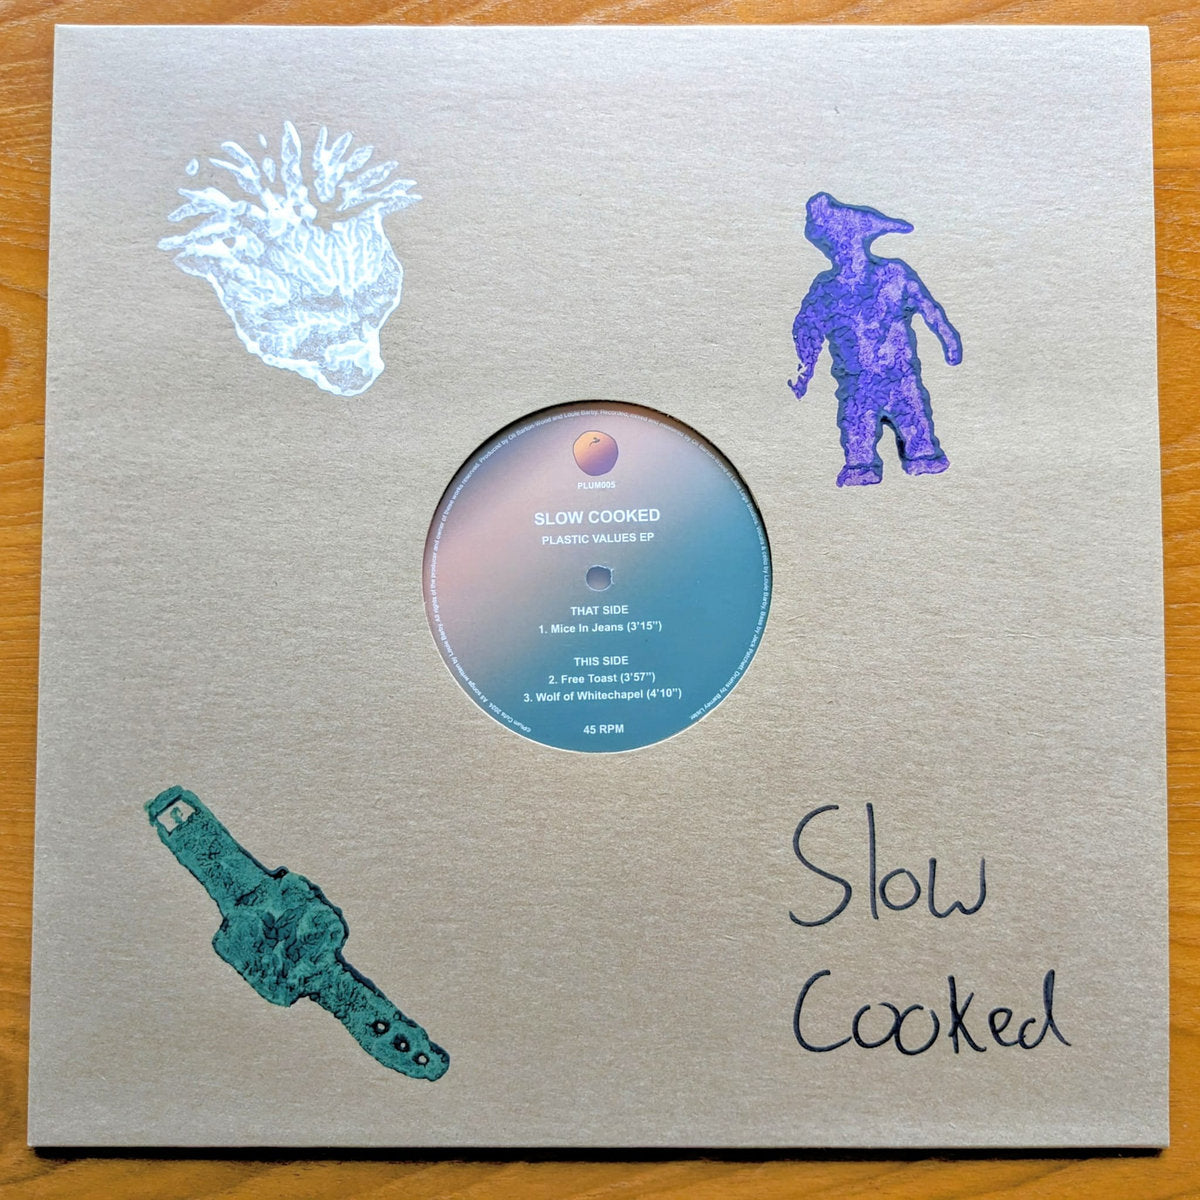 SLOW COOKED - Plastic Values